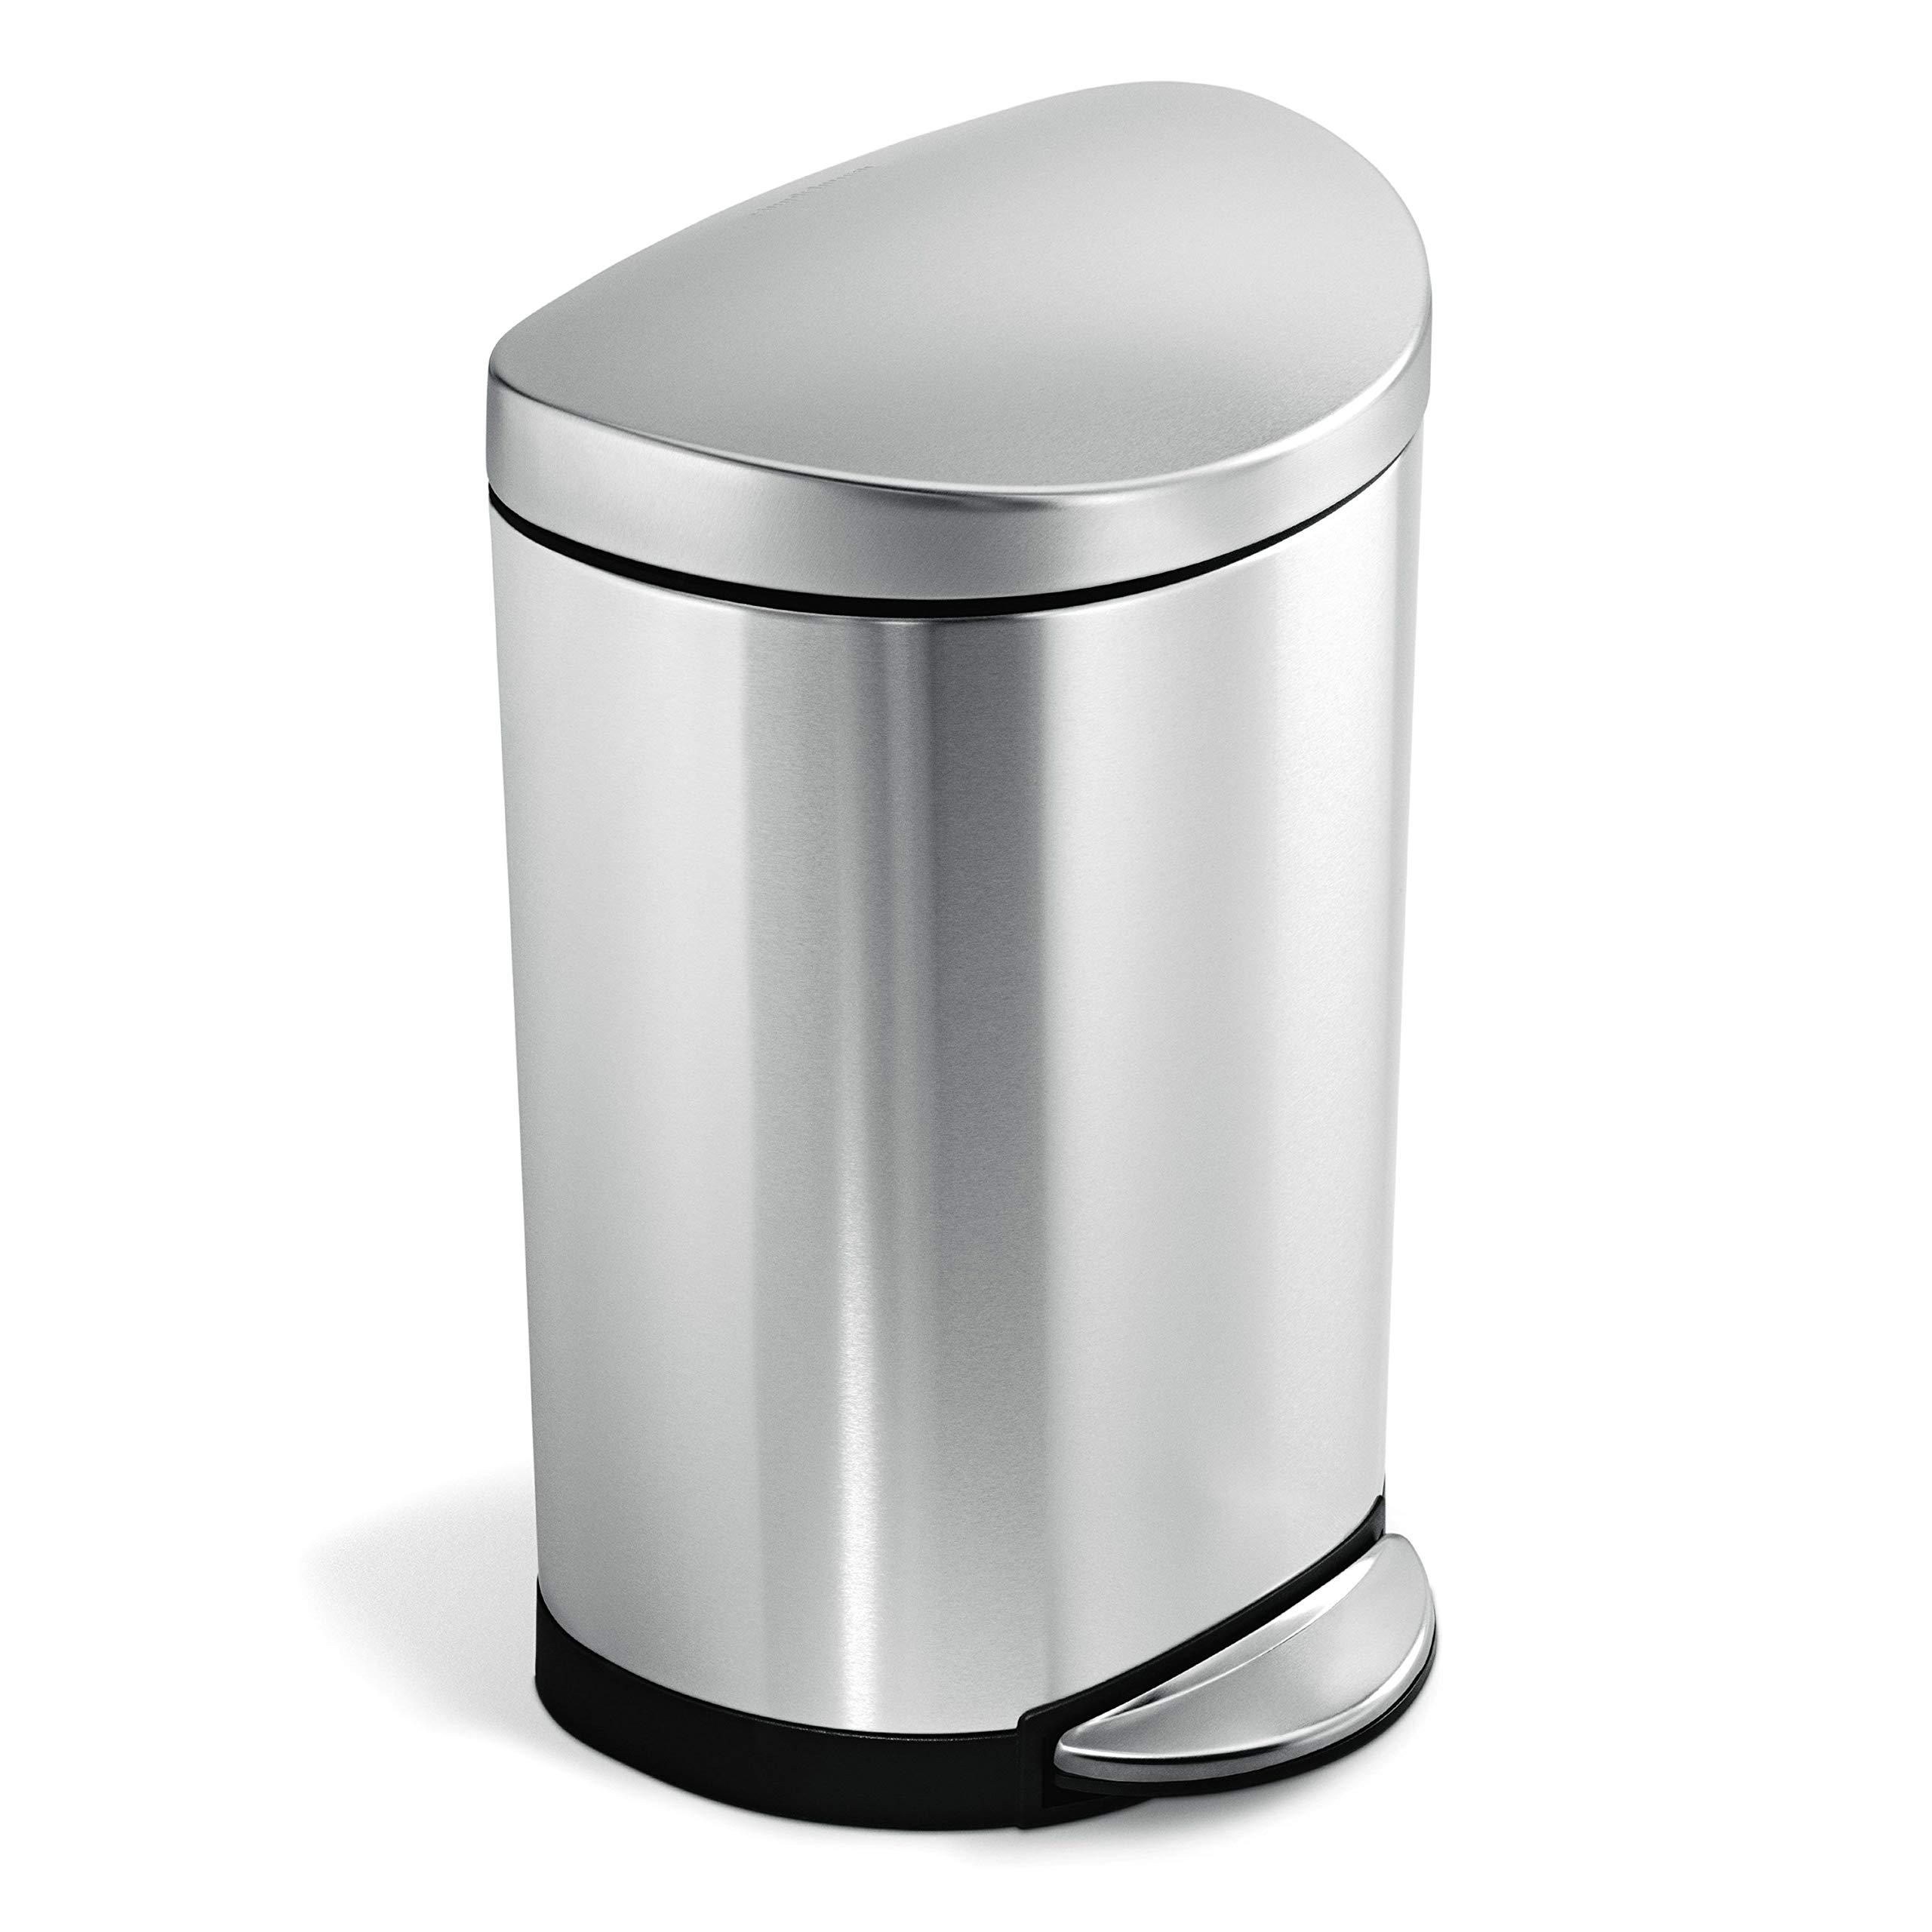 Book Cover simplehuman 10 Liter / 2.6 Gallon Small Semi-Round Bathroom Step Trash Can, Brushed Stainless Steel Brushed Stainless Steel 10 Liter Semi-Round